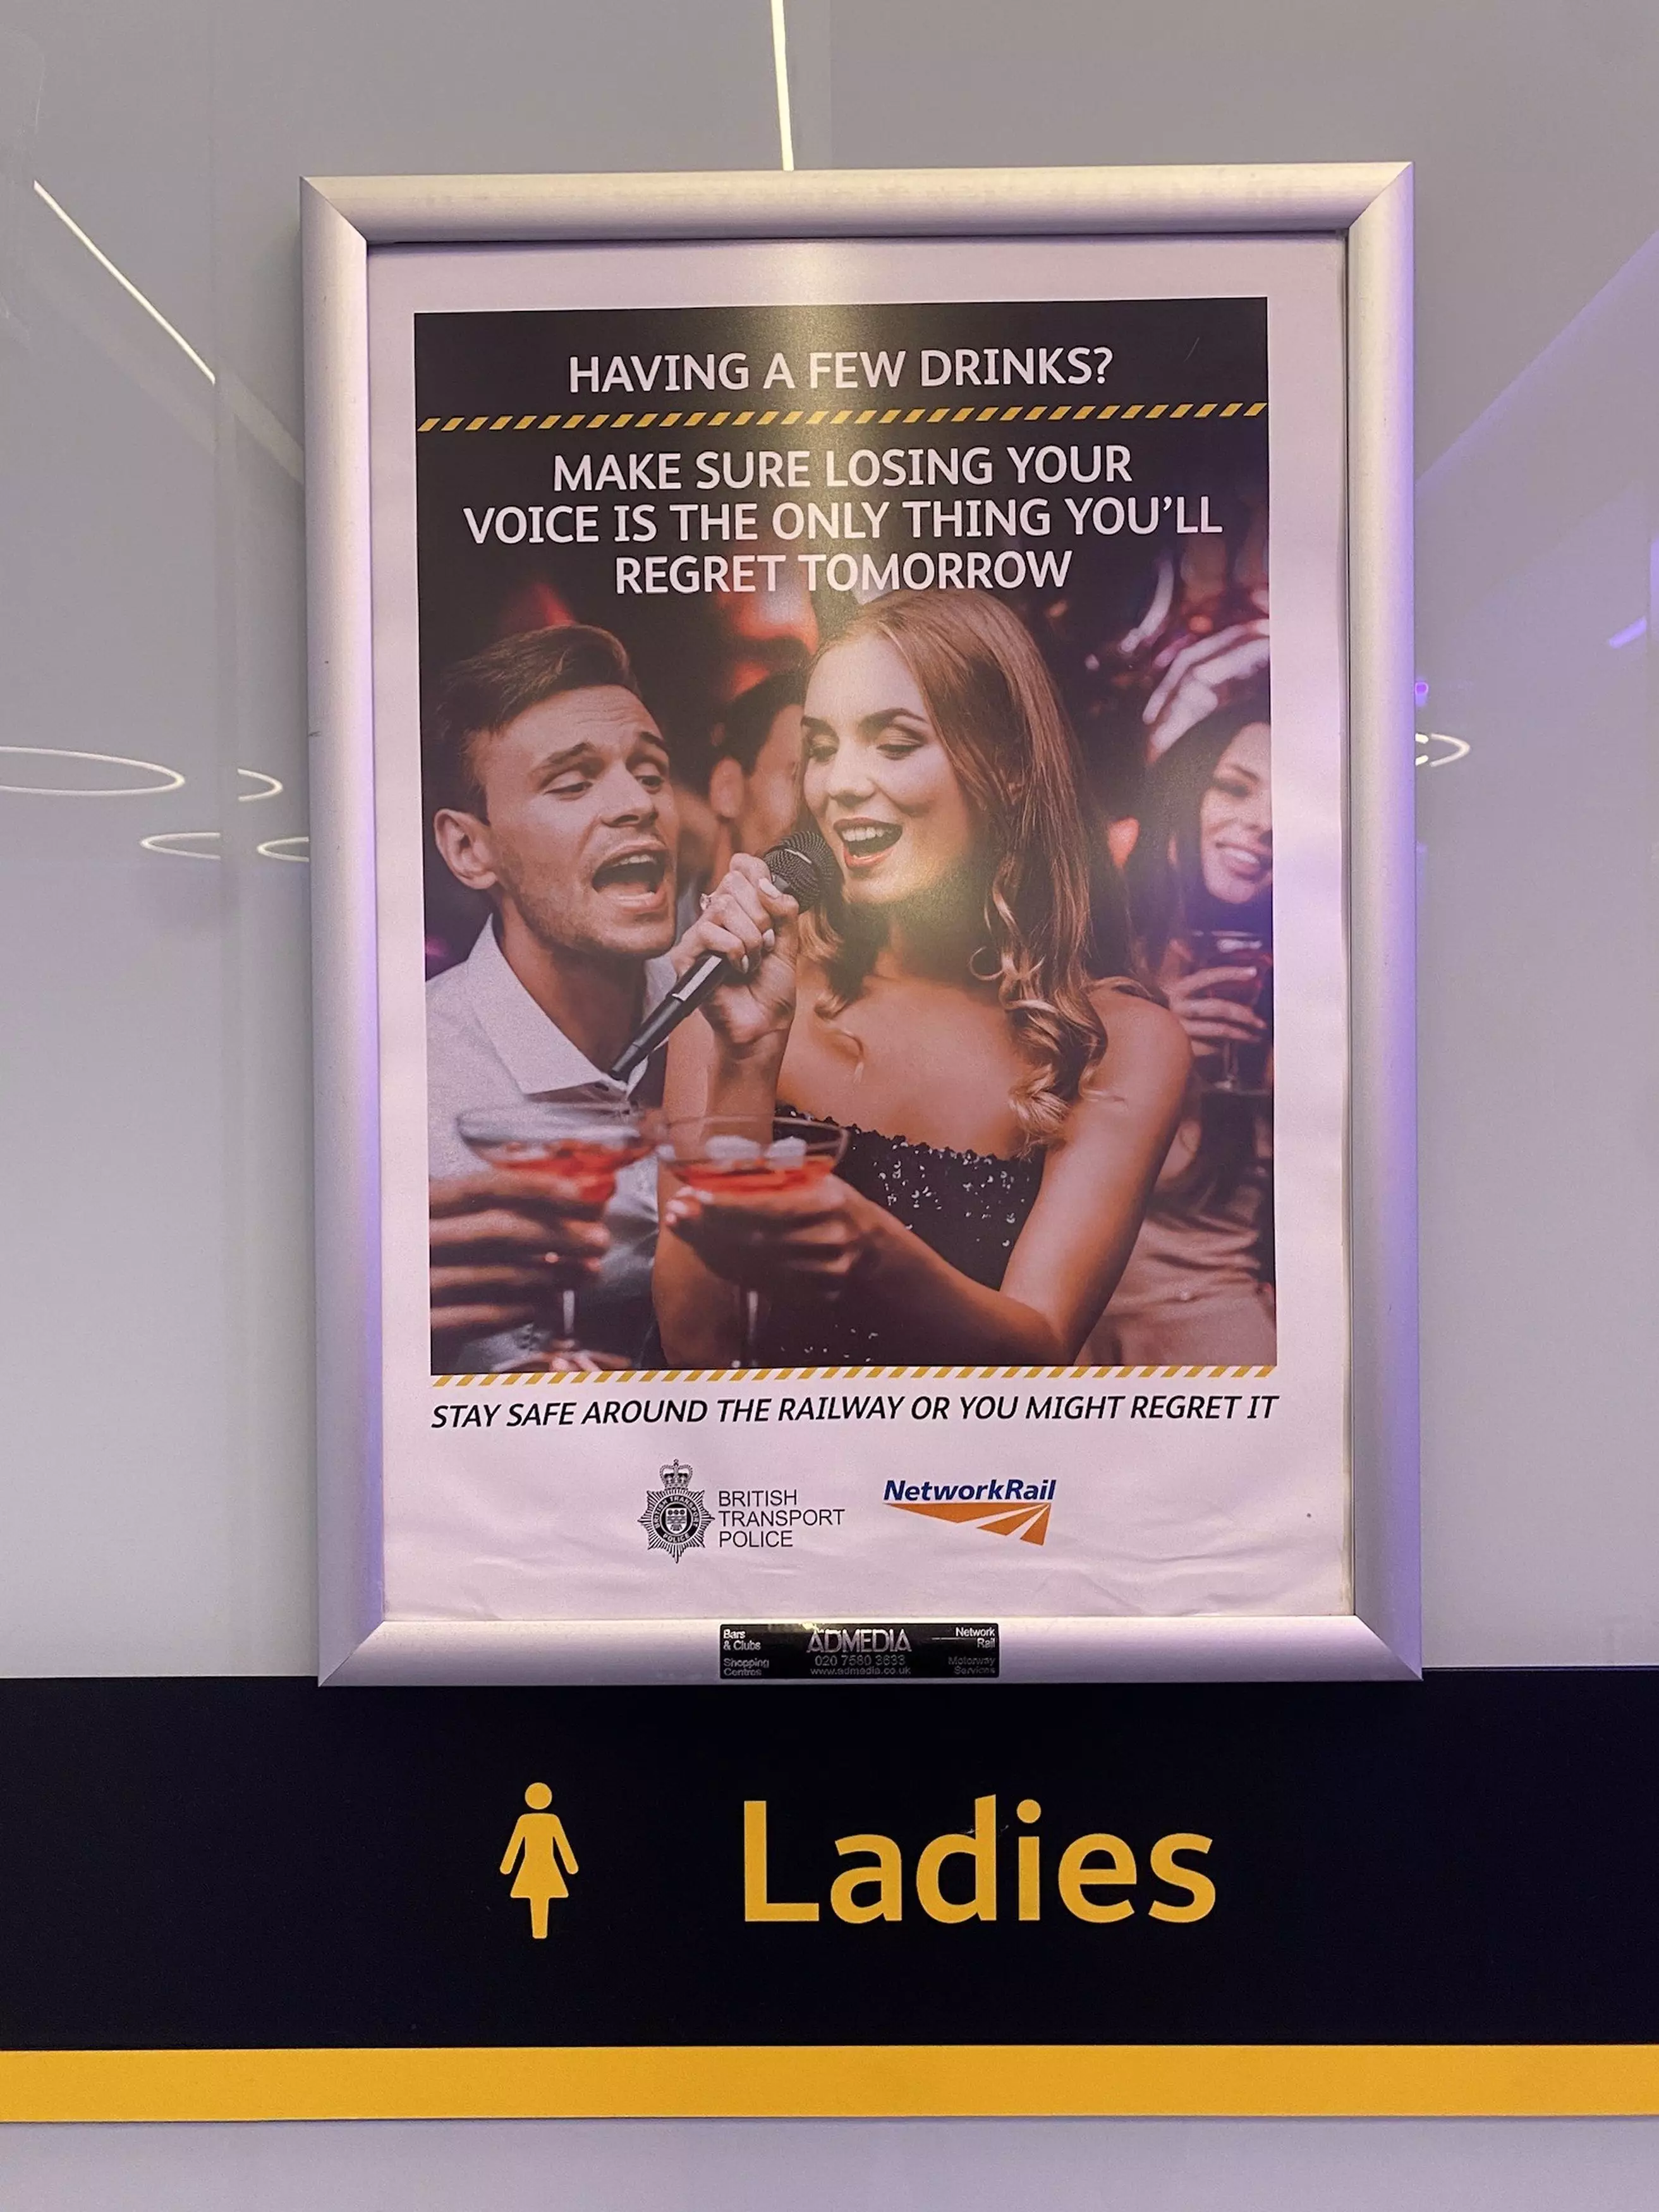 Fleur found the poster at King's Cross station in London (